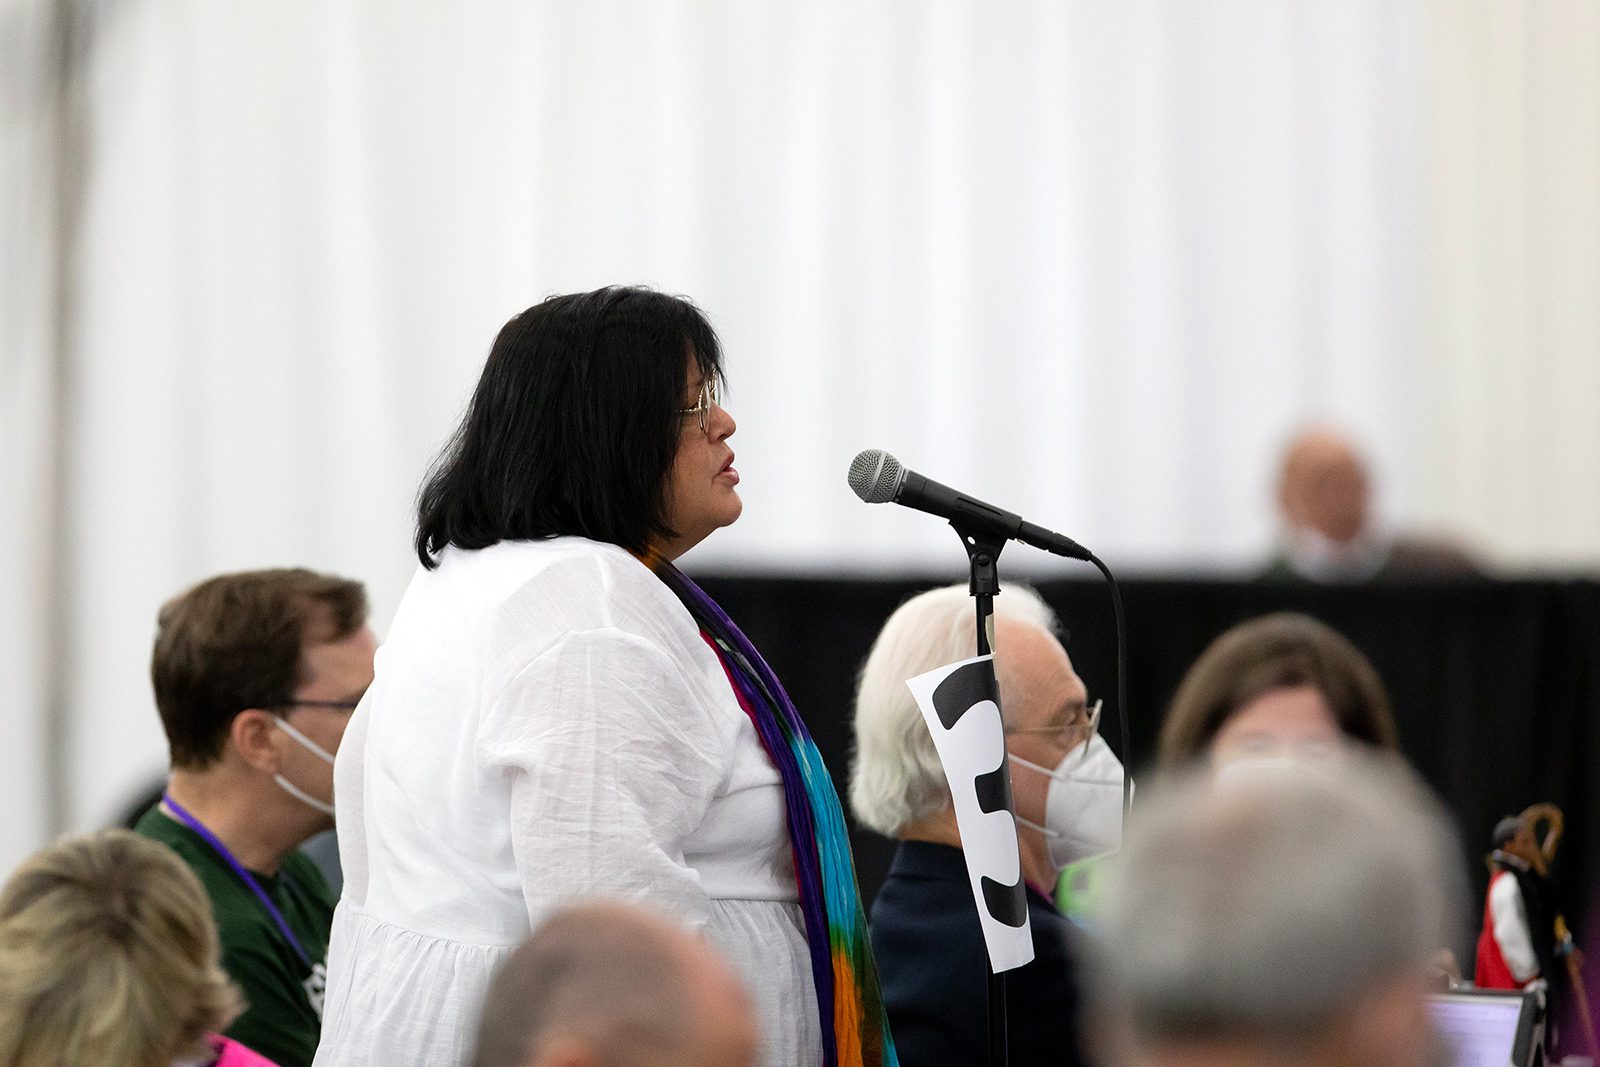 Bishop Carol J. Gallagher, regional canon for the Central Region of the Diocese of Massachusetts, speaks during the Episcopal Church General Convention in Baltimore, Maryland. Photo by Randall Gornowich